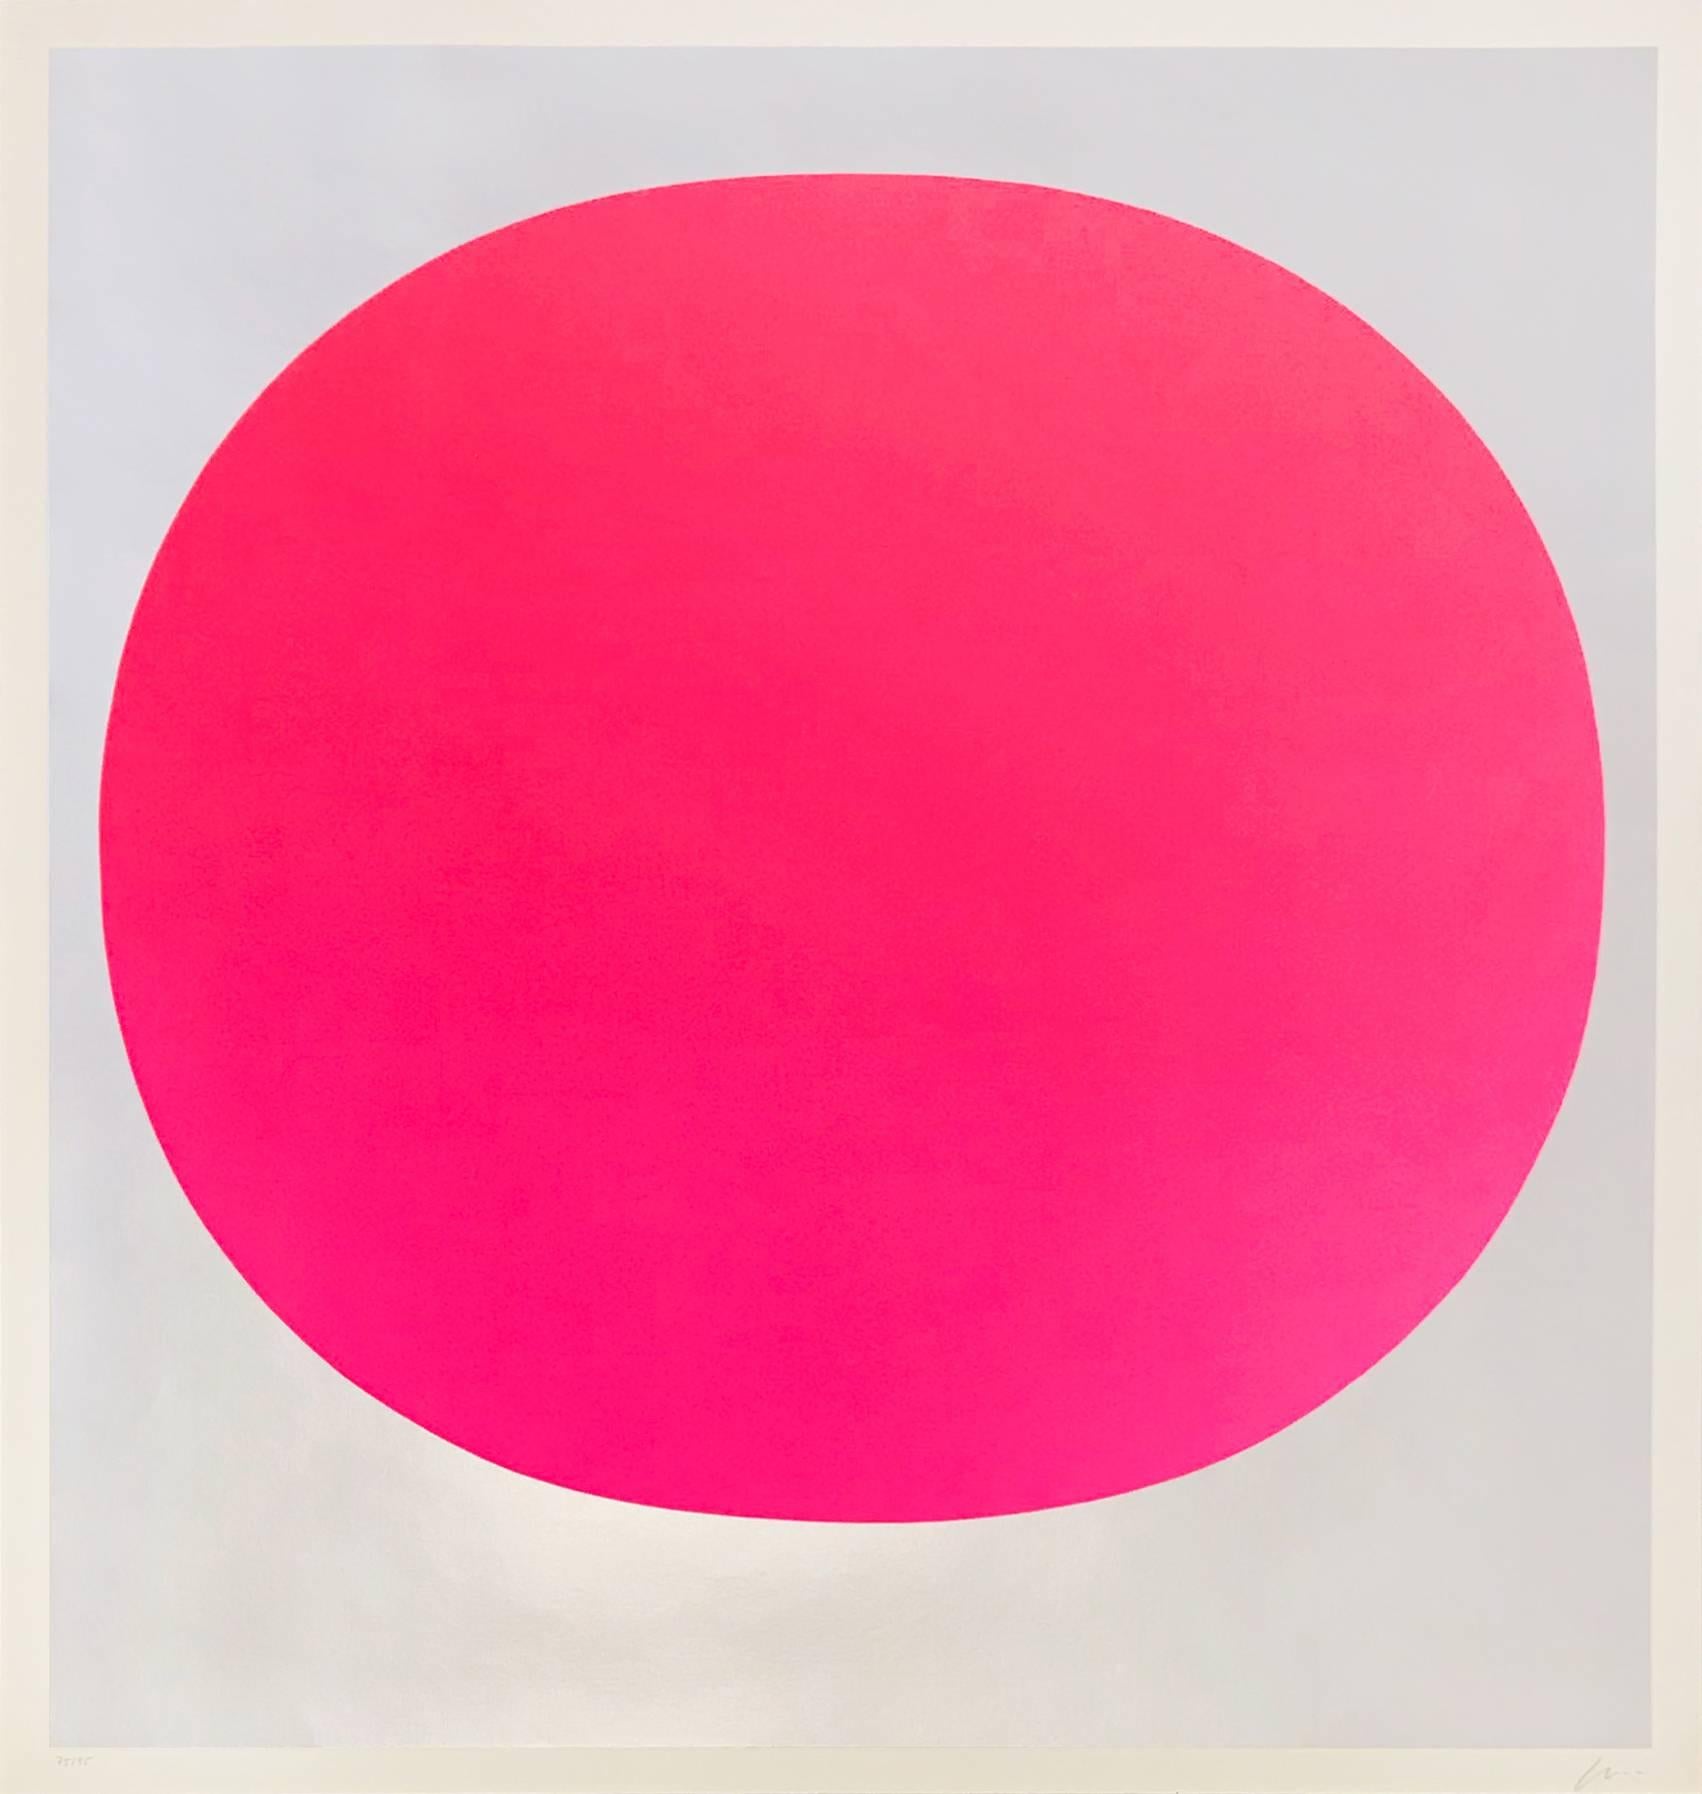 Rupprecht Geiger Abstract Painting - Pink on Silver (from "Colour in the Round")